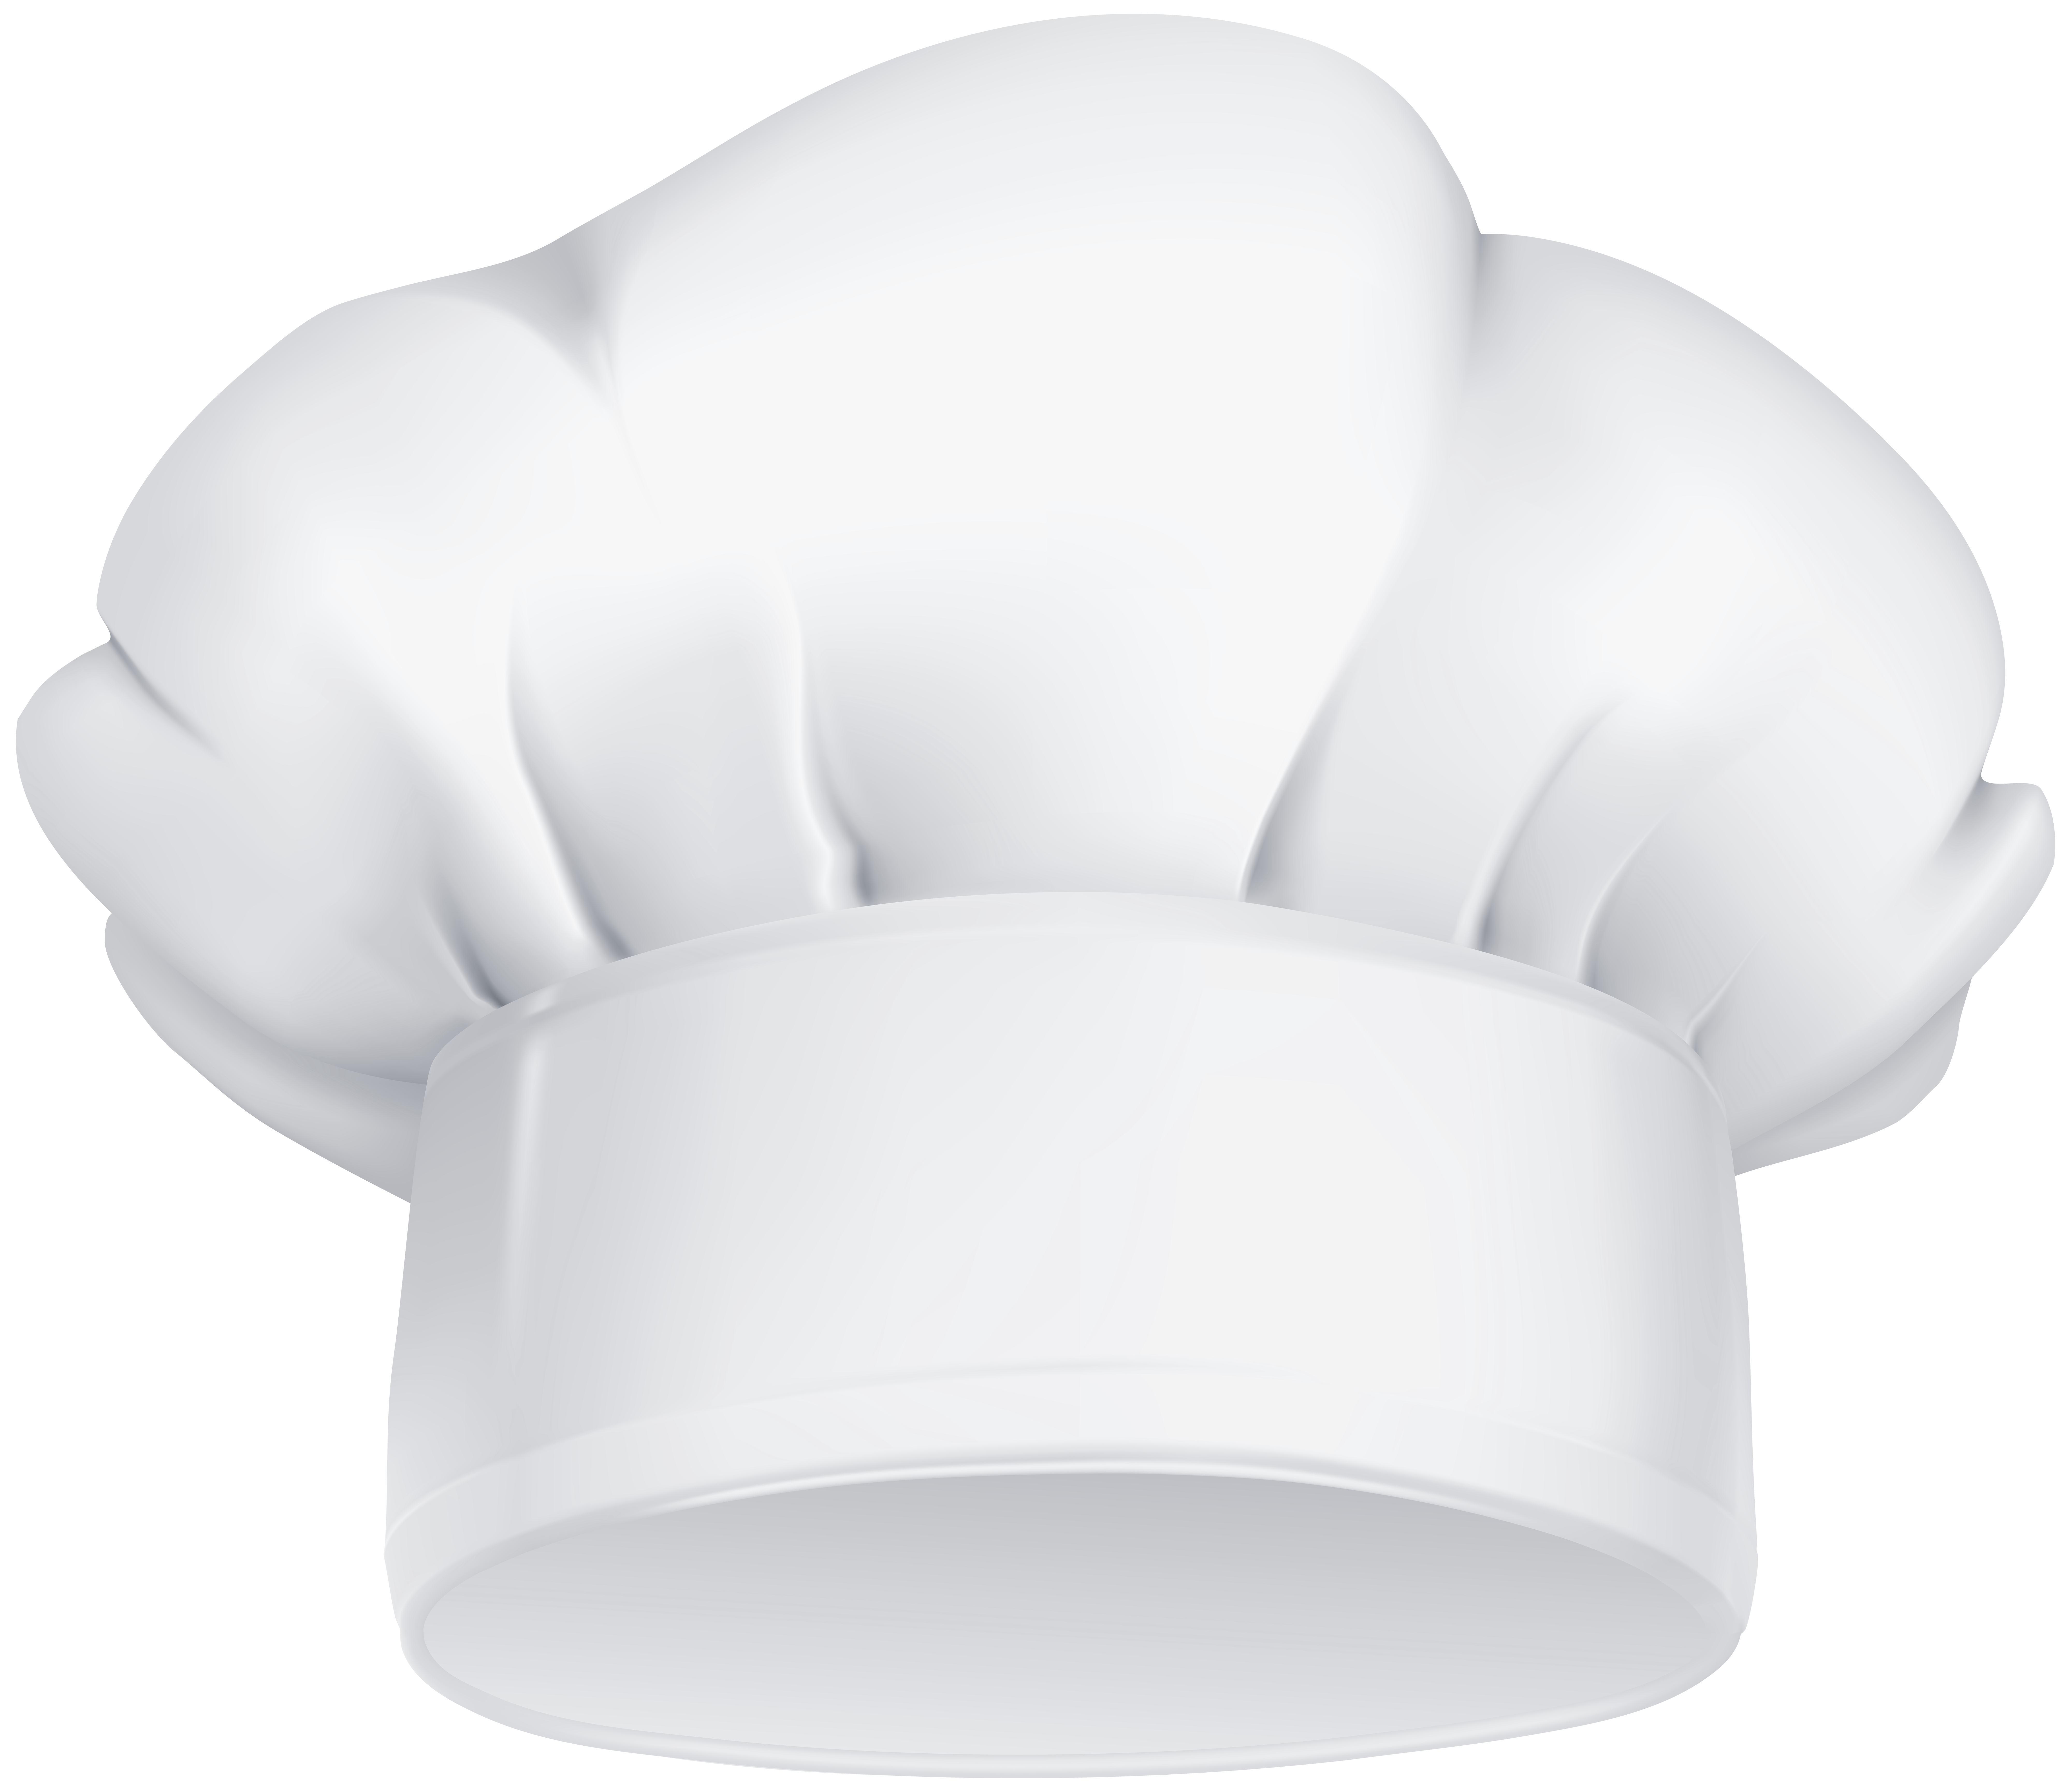 Chef Hat Download Free PNG